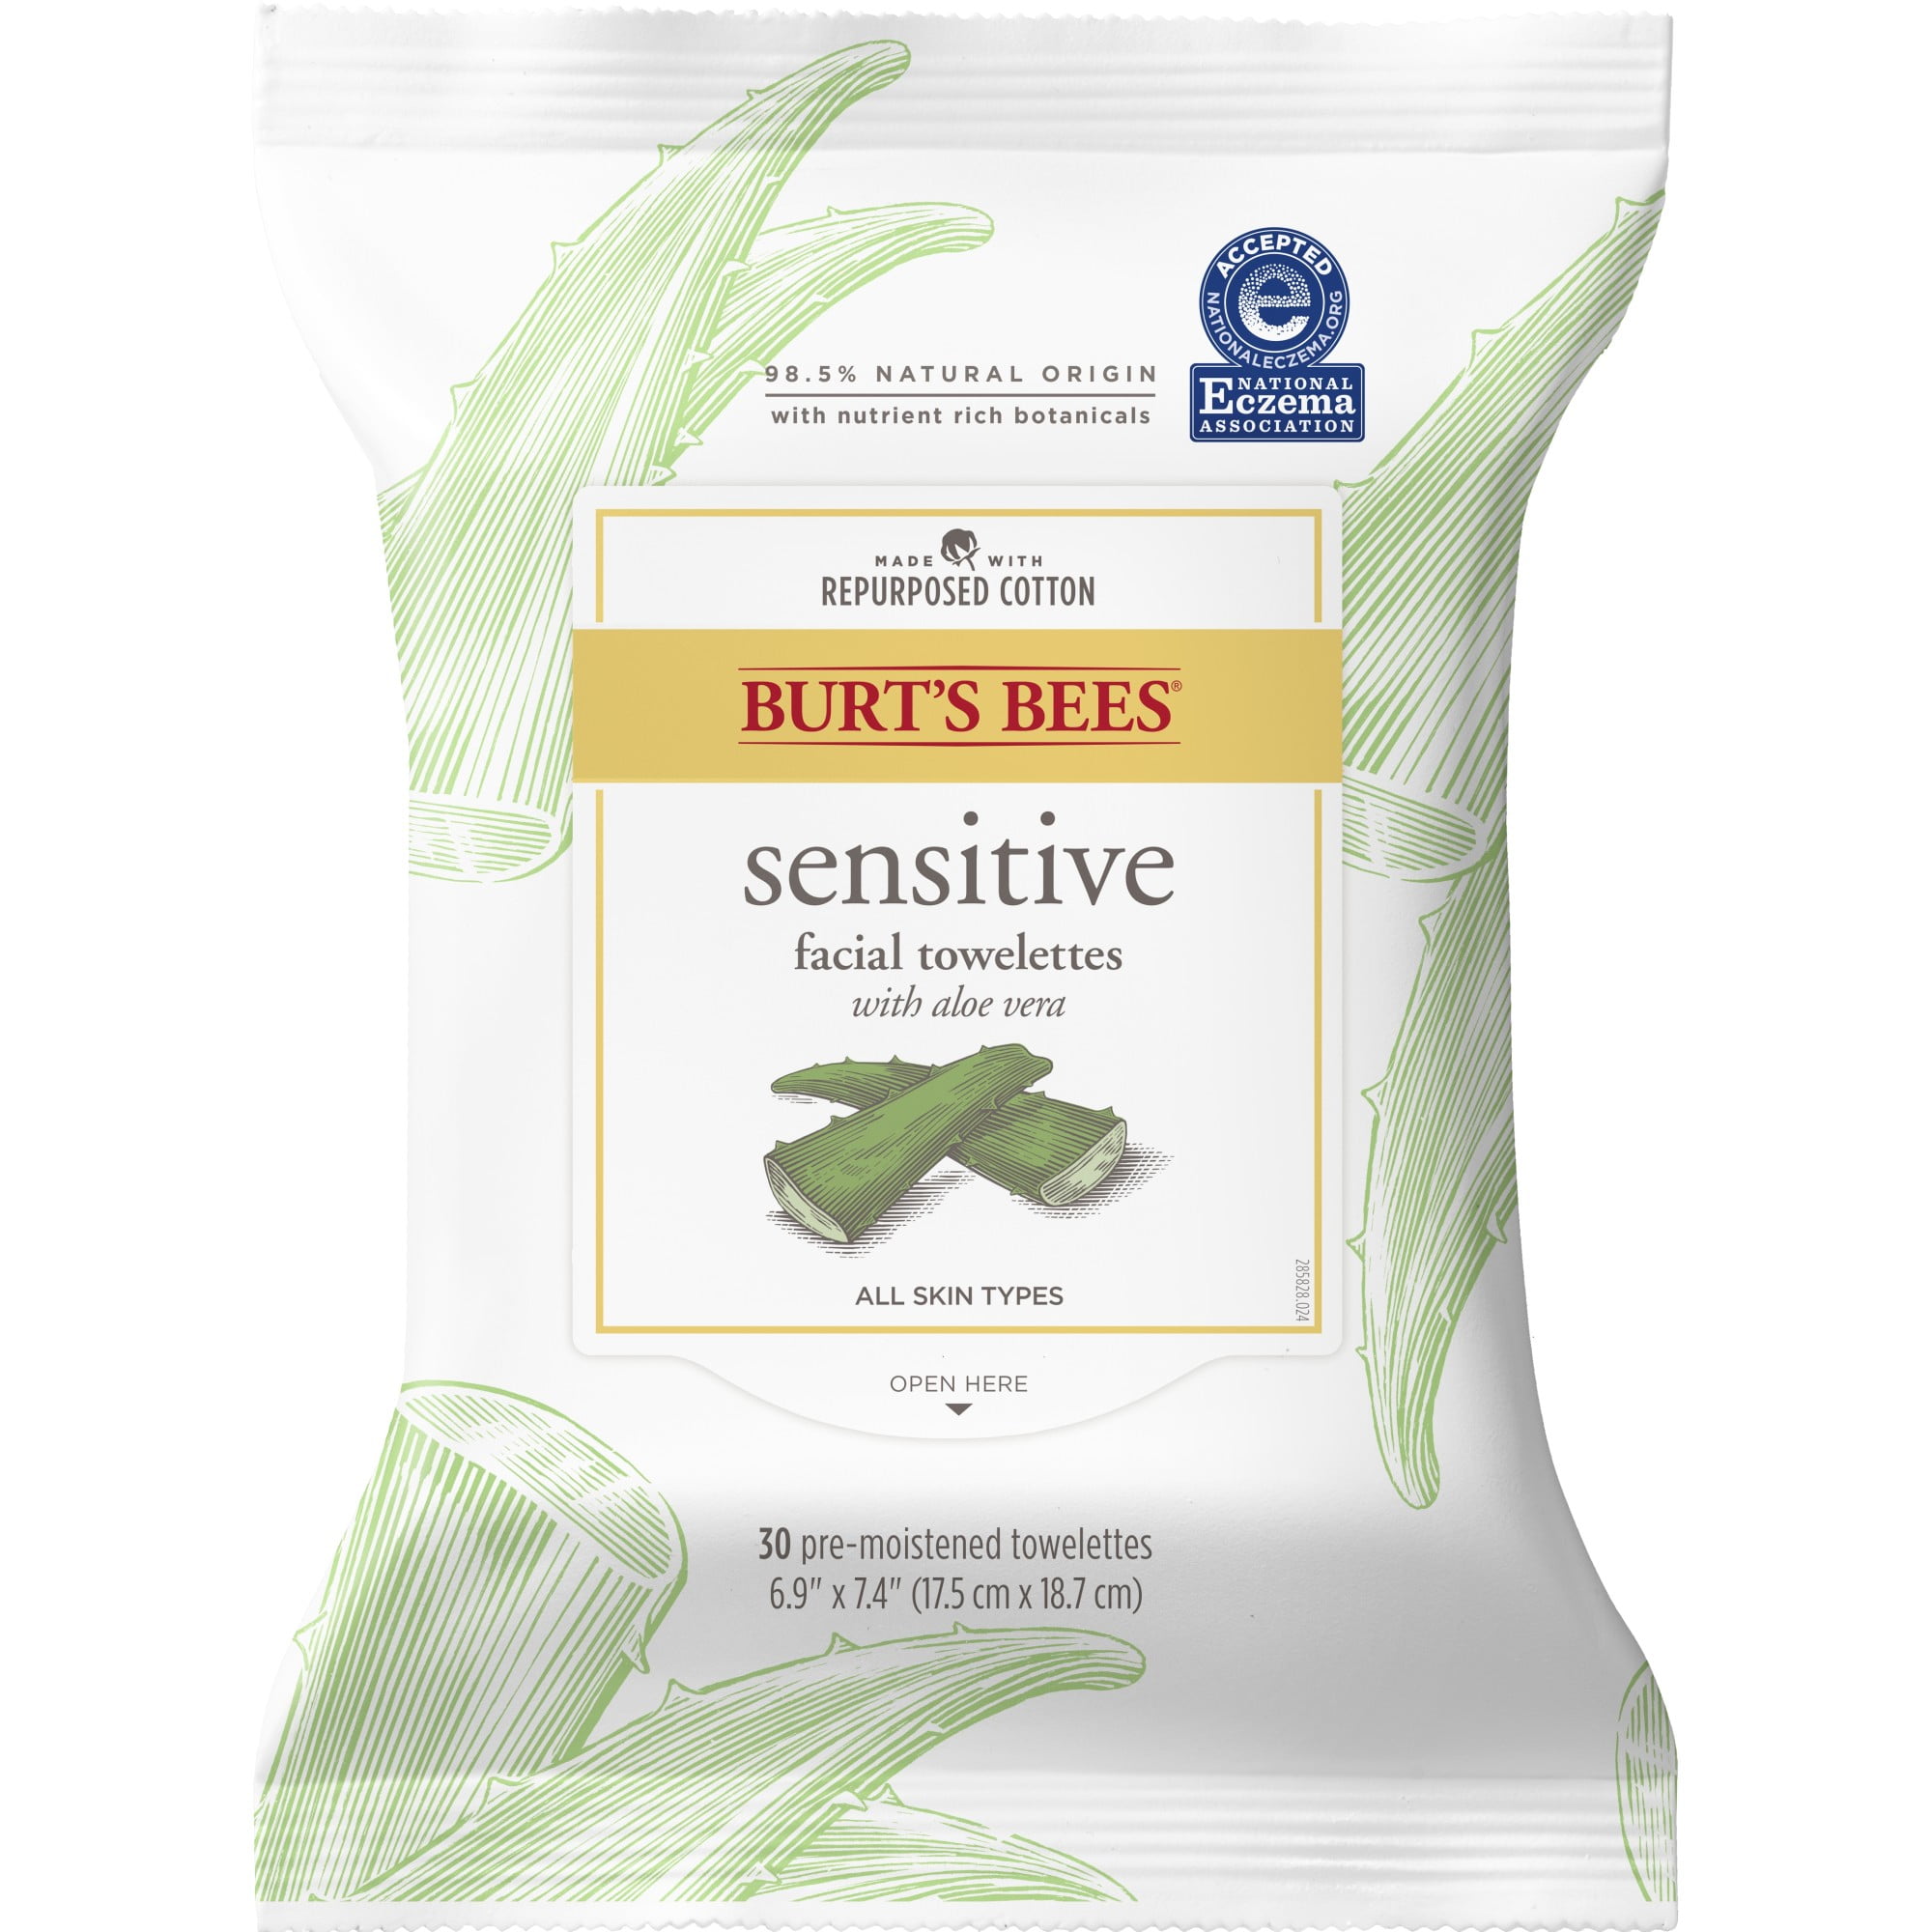 Burts Bees Sensitive Facial Cleanser Towelettes with Aloe Extract, 30 Count